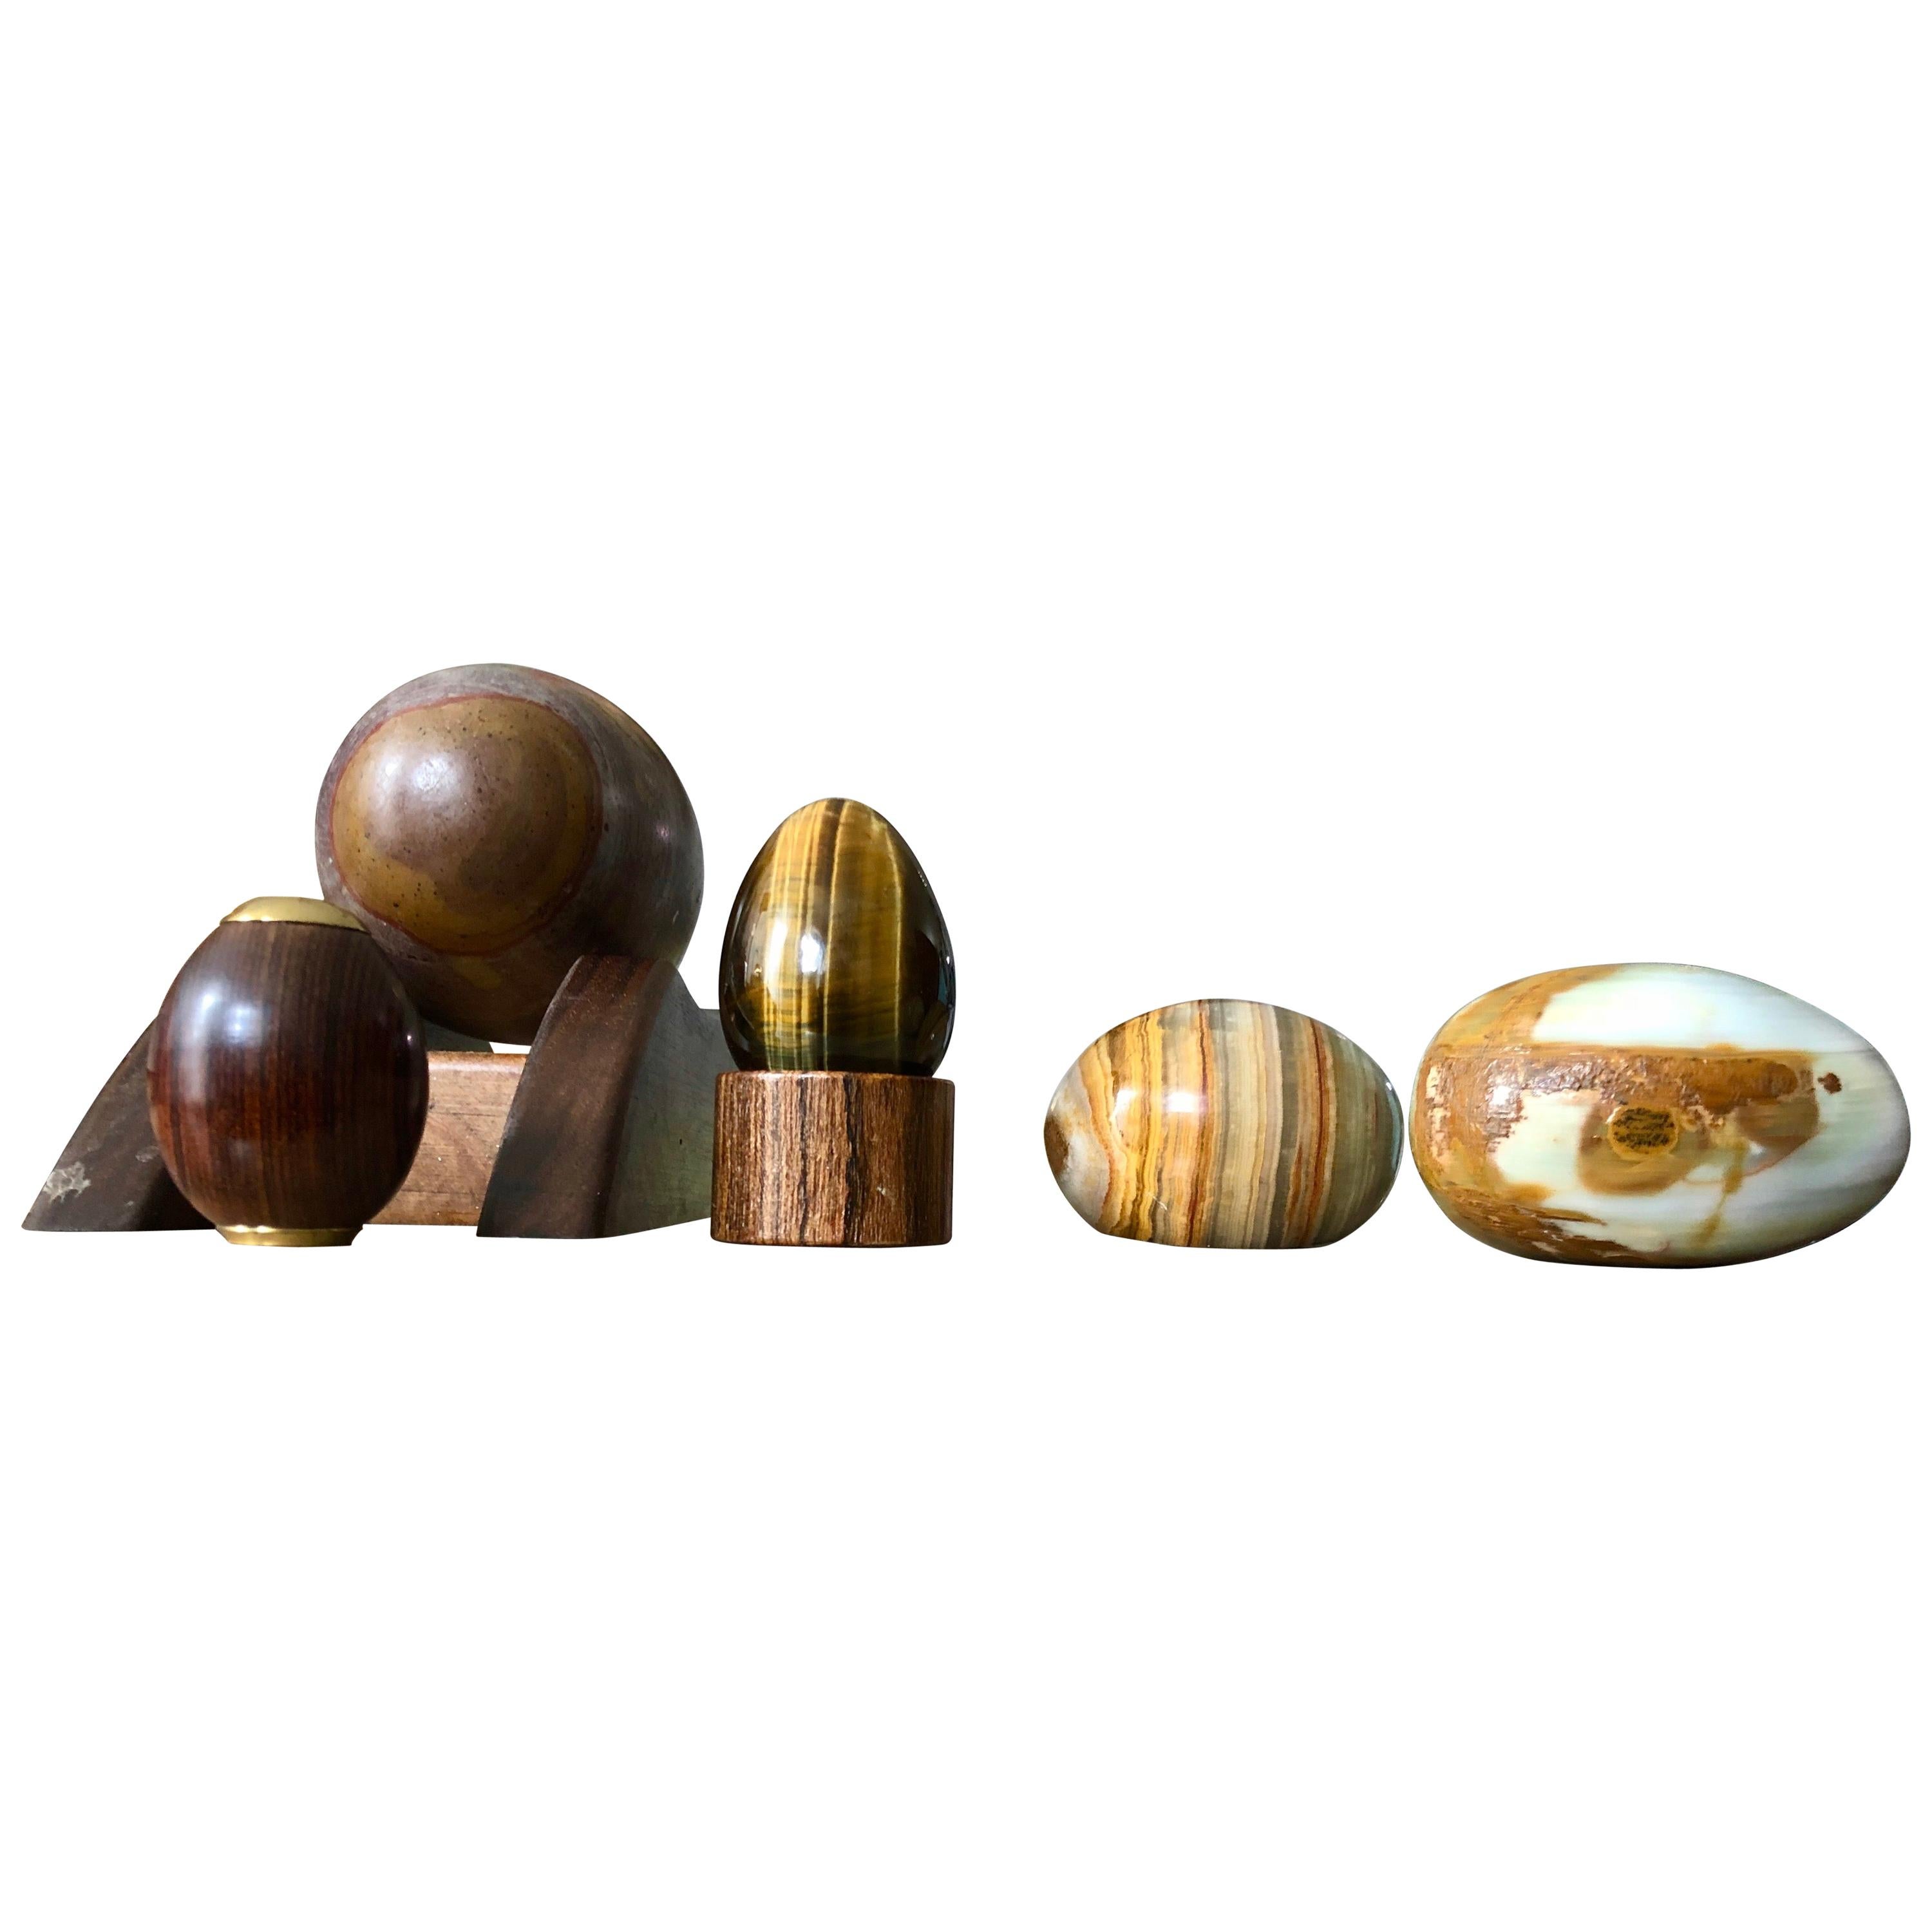 Organic Modern Hand Carved and Burnished Stone and Wood Egg and Holster Set